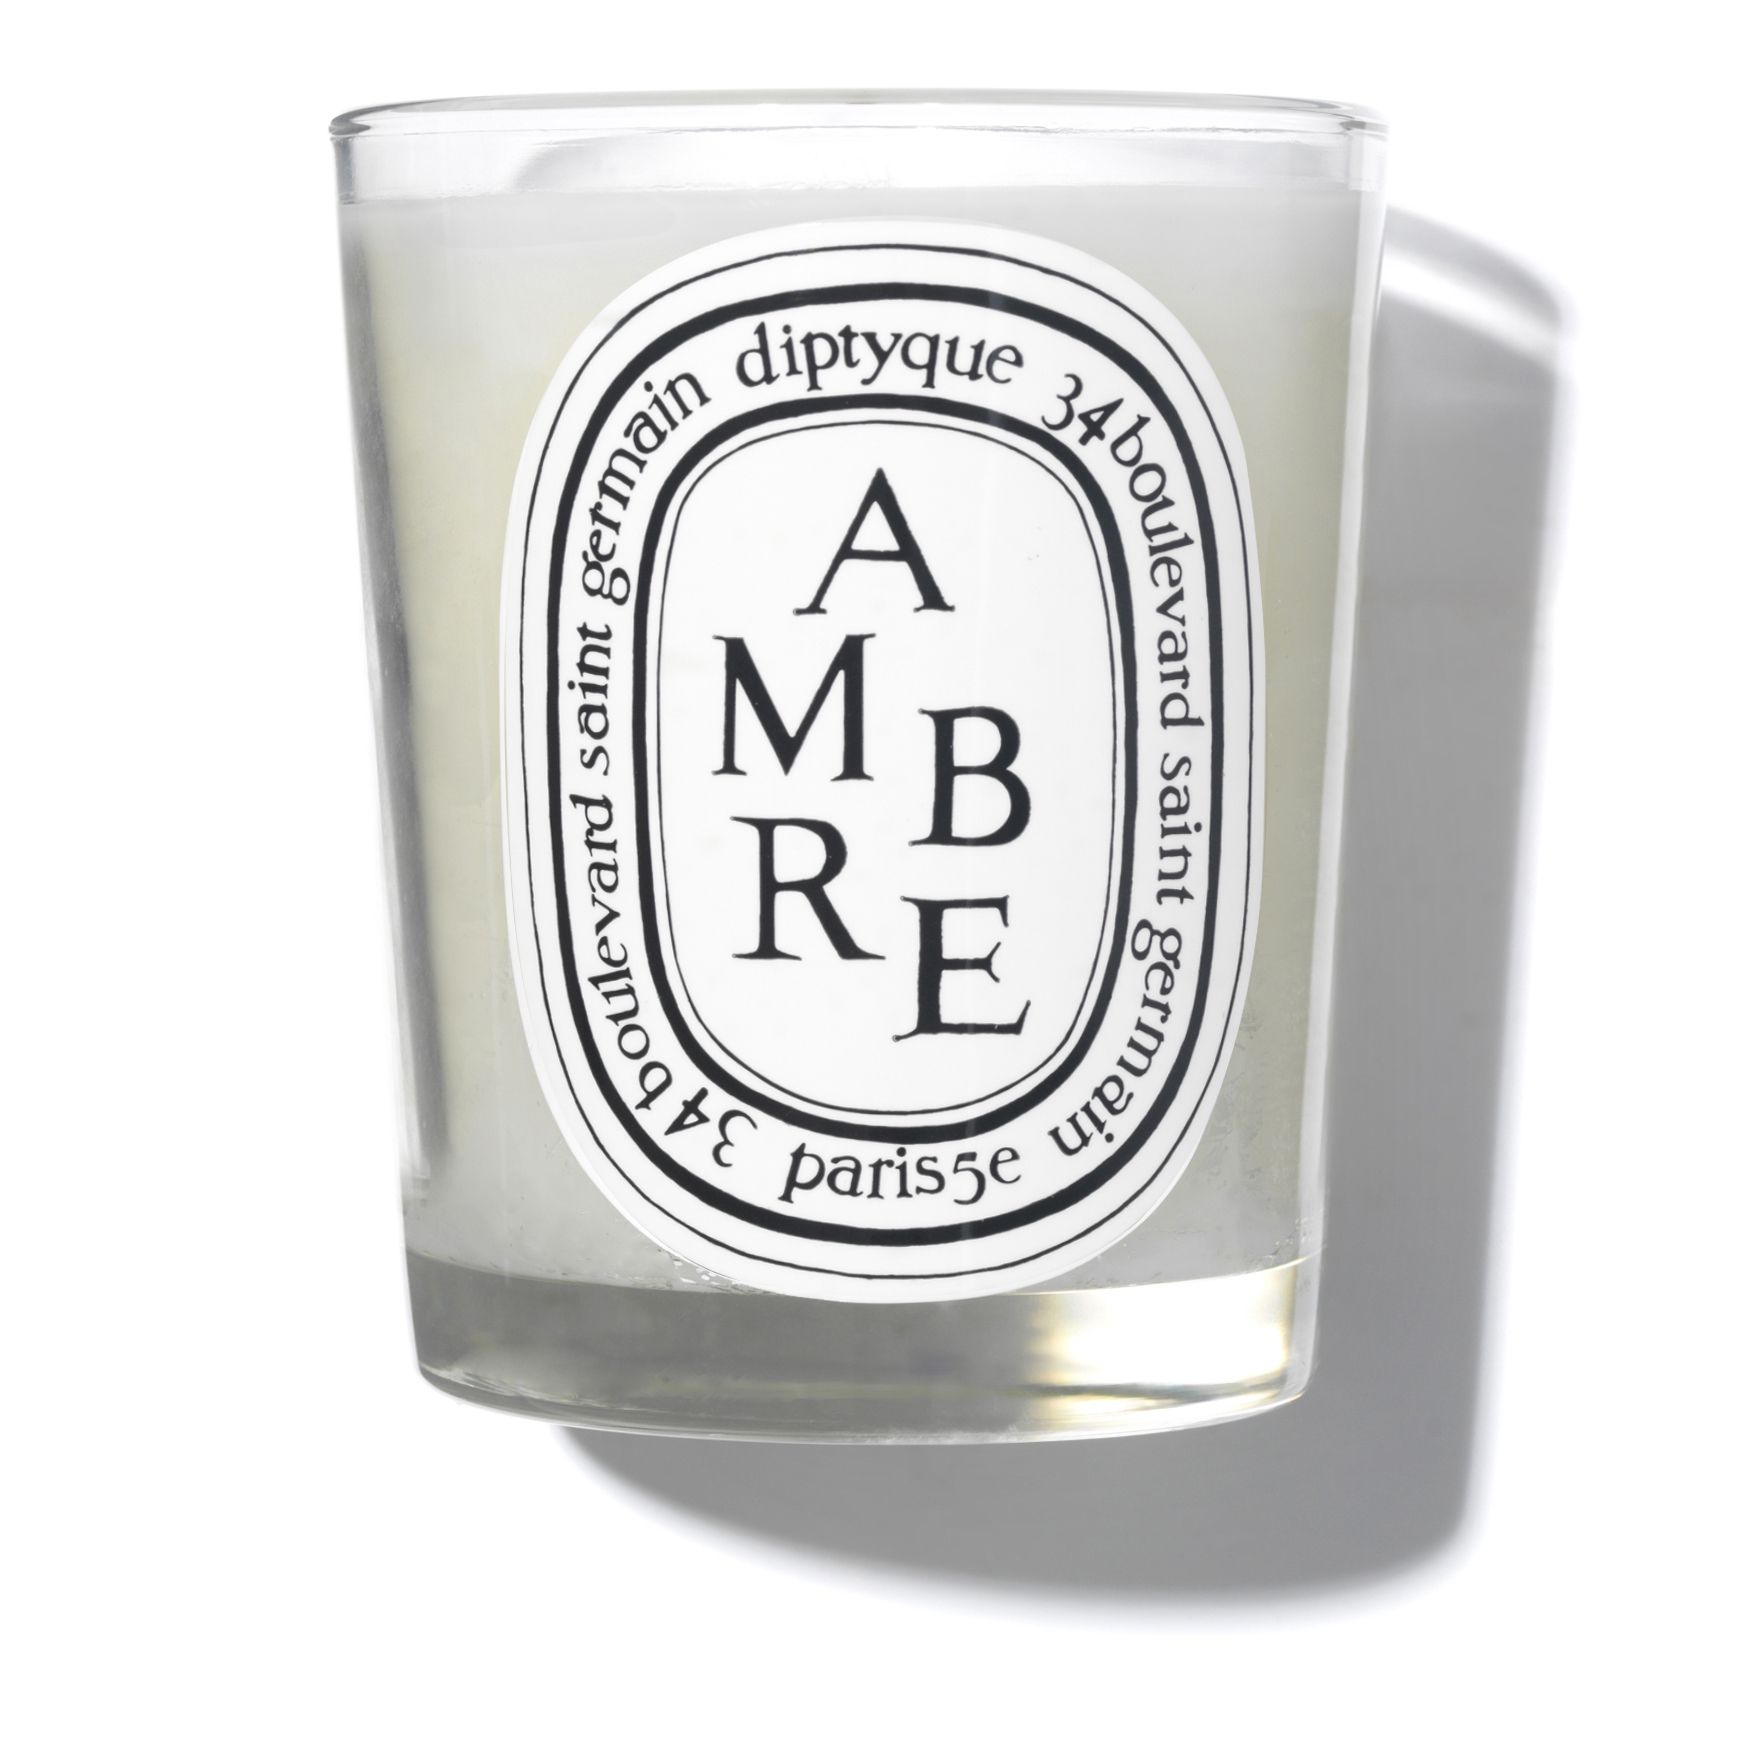 Diptyque Amber Scented Candle 190g | Space NK (EU)